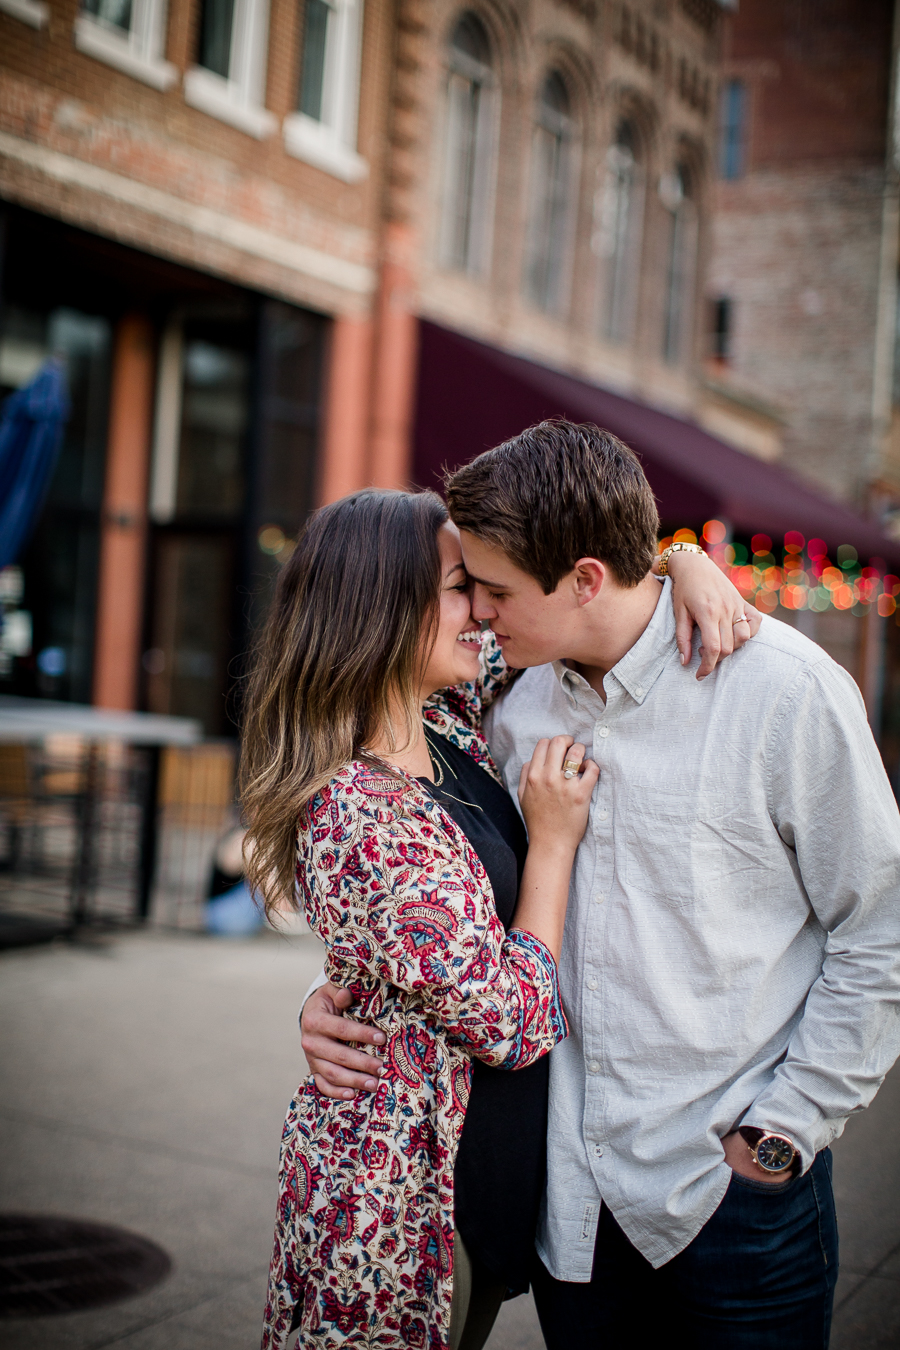 Almost kissing engagement photo by Knoxville Wedding Photographer, Amanda May Photos.